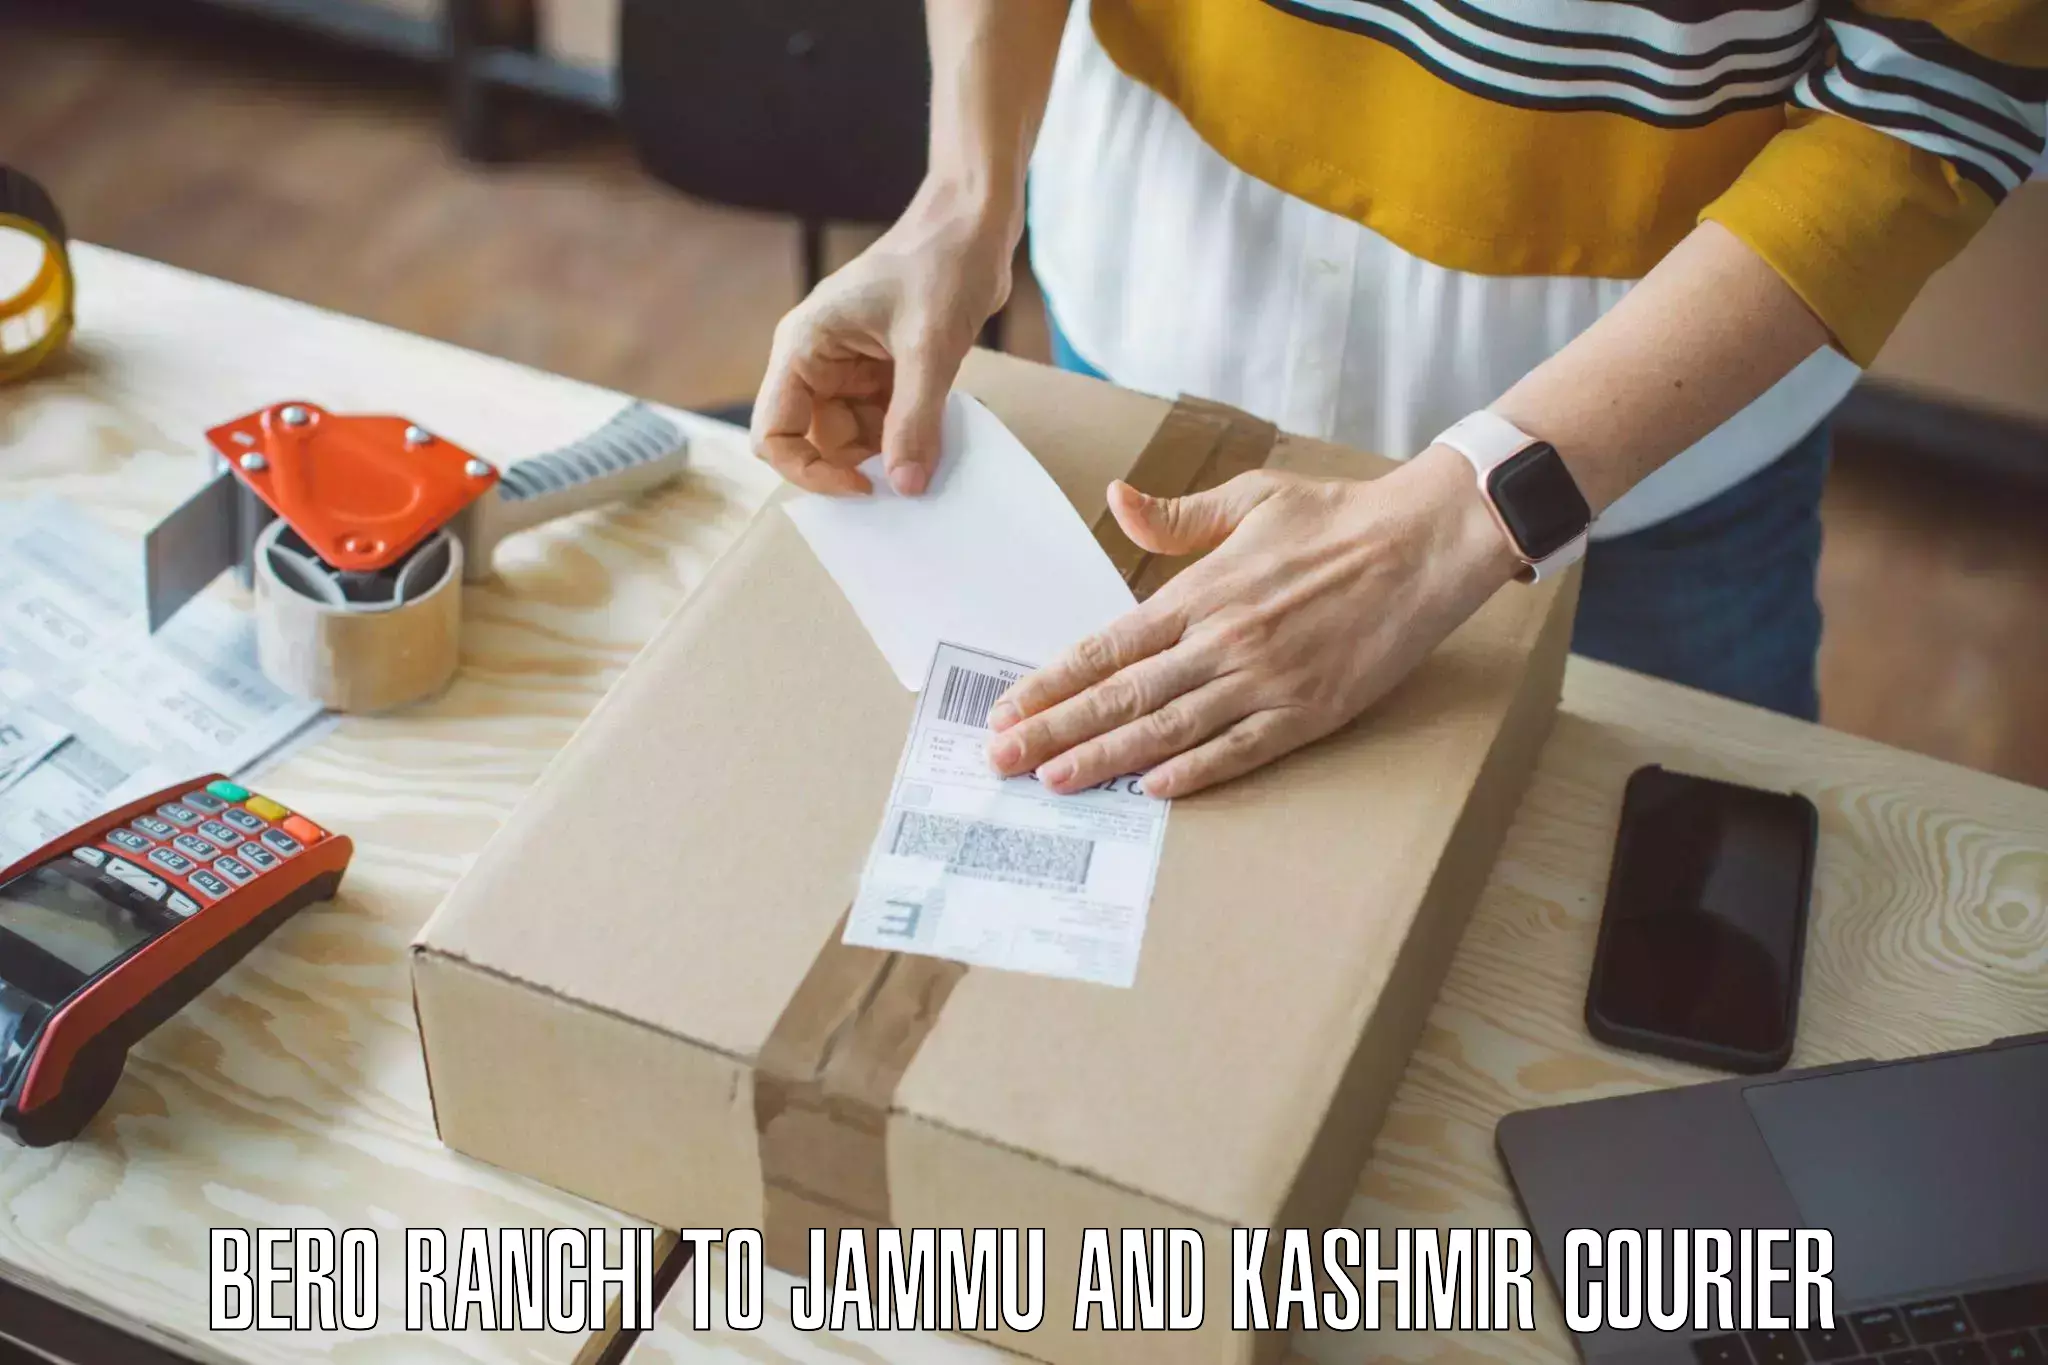 Trusted relocation experts Bero Ranchi to Jammu and Kashmir